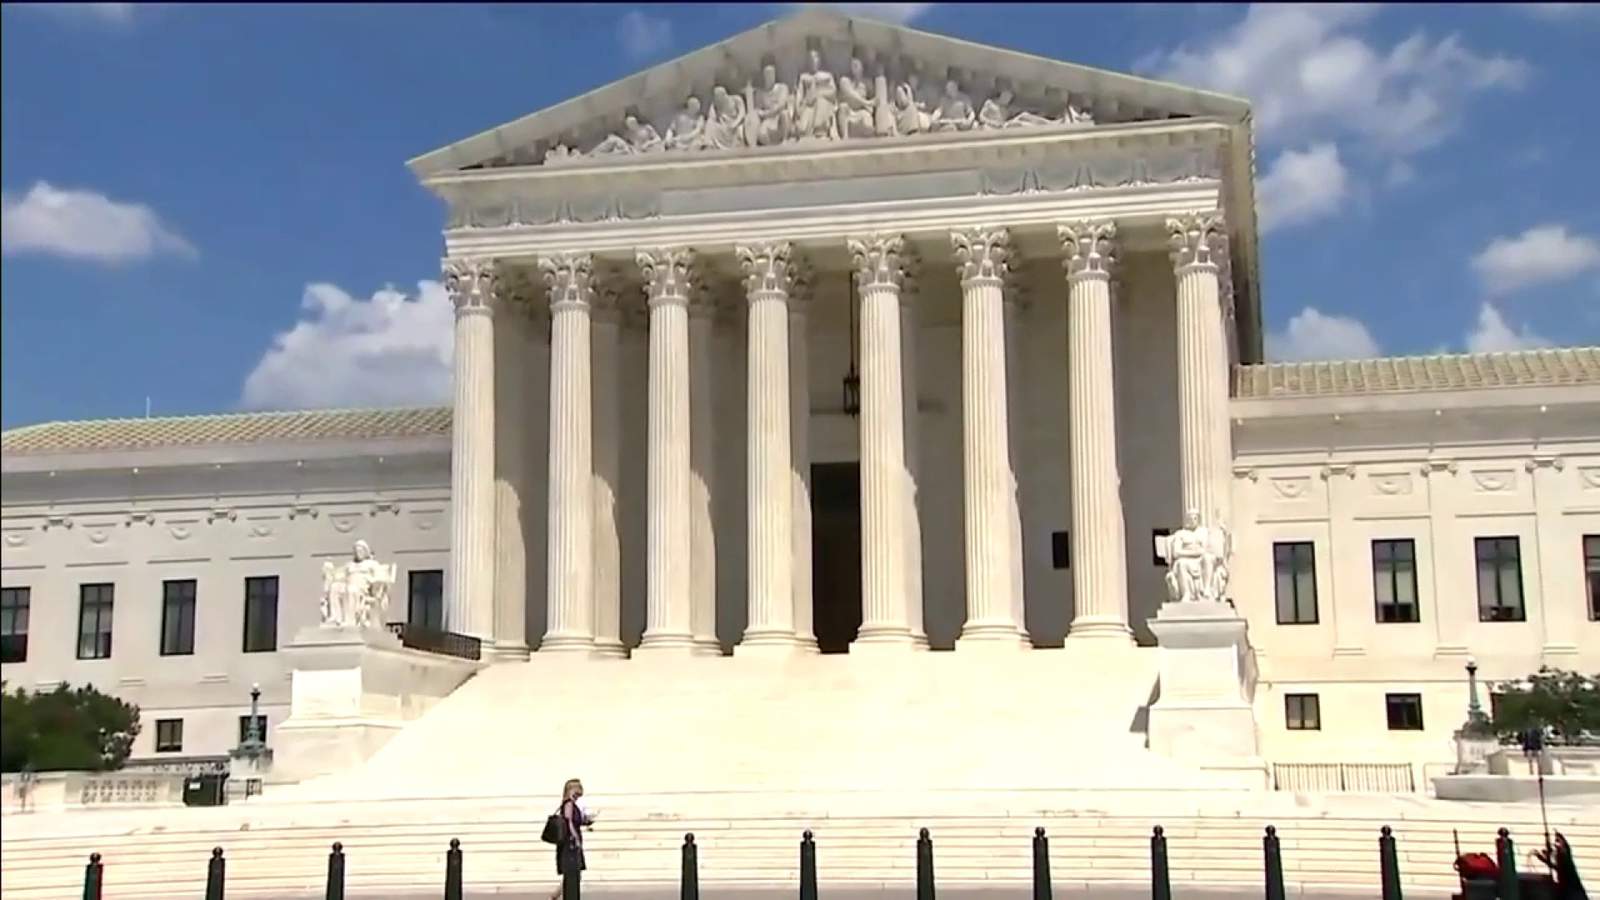 Things look bleak for legislative effort to expand Supreme Court to 13 justices